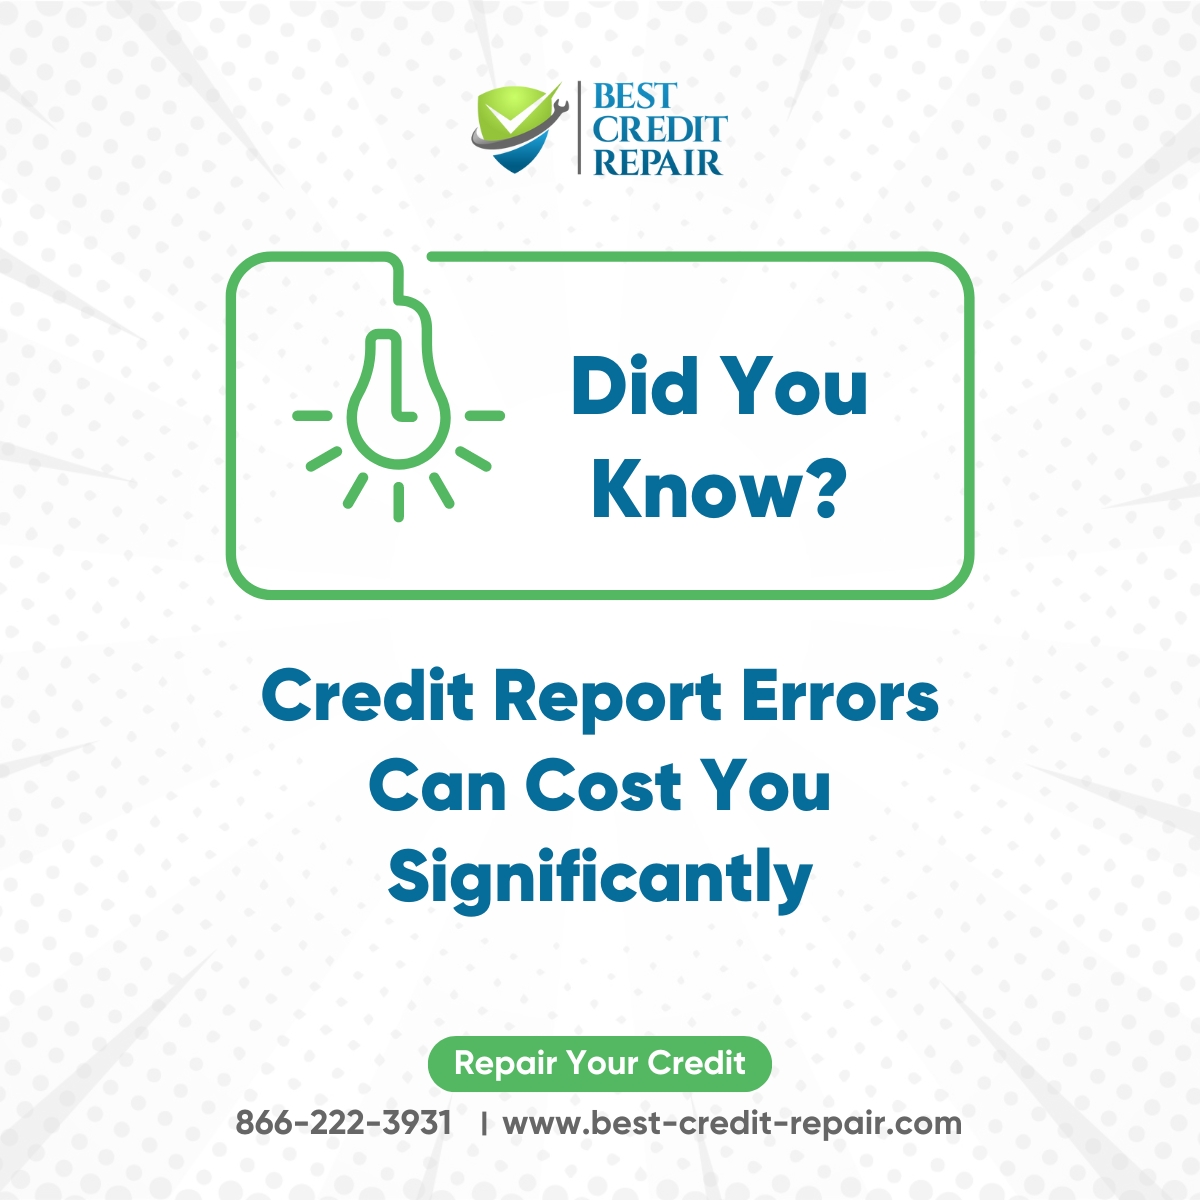 We identify and fix inaccuracies in your credit report. We'll ensure your credit history accurately reflects your financial responsibility.
No matter the credit challenges, our credit repair specialists can help.

Contact Us
866-222-3931

#creditrepair #creditscore